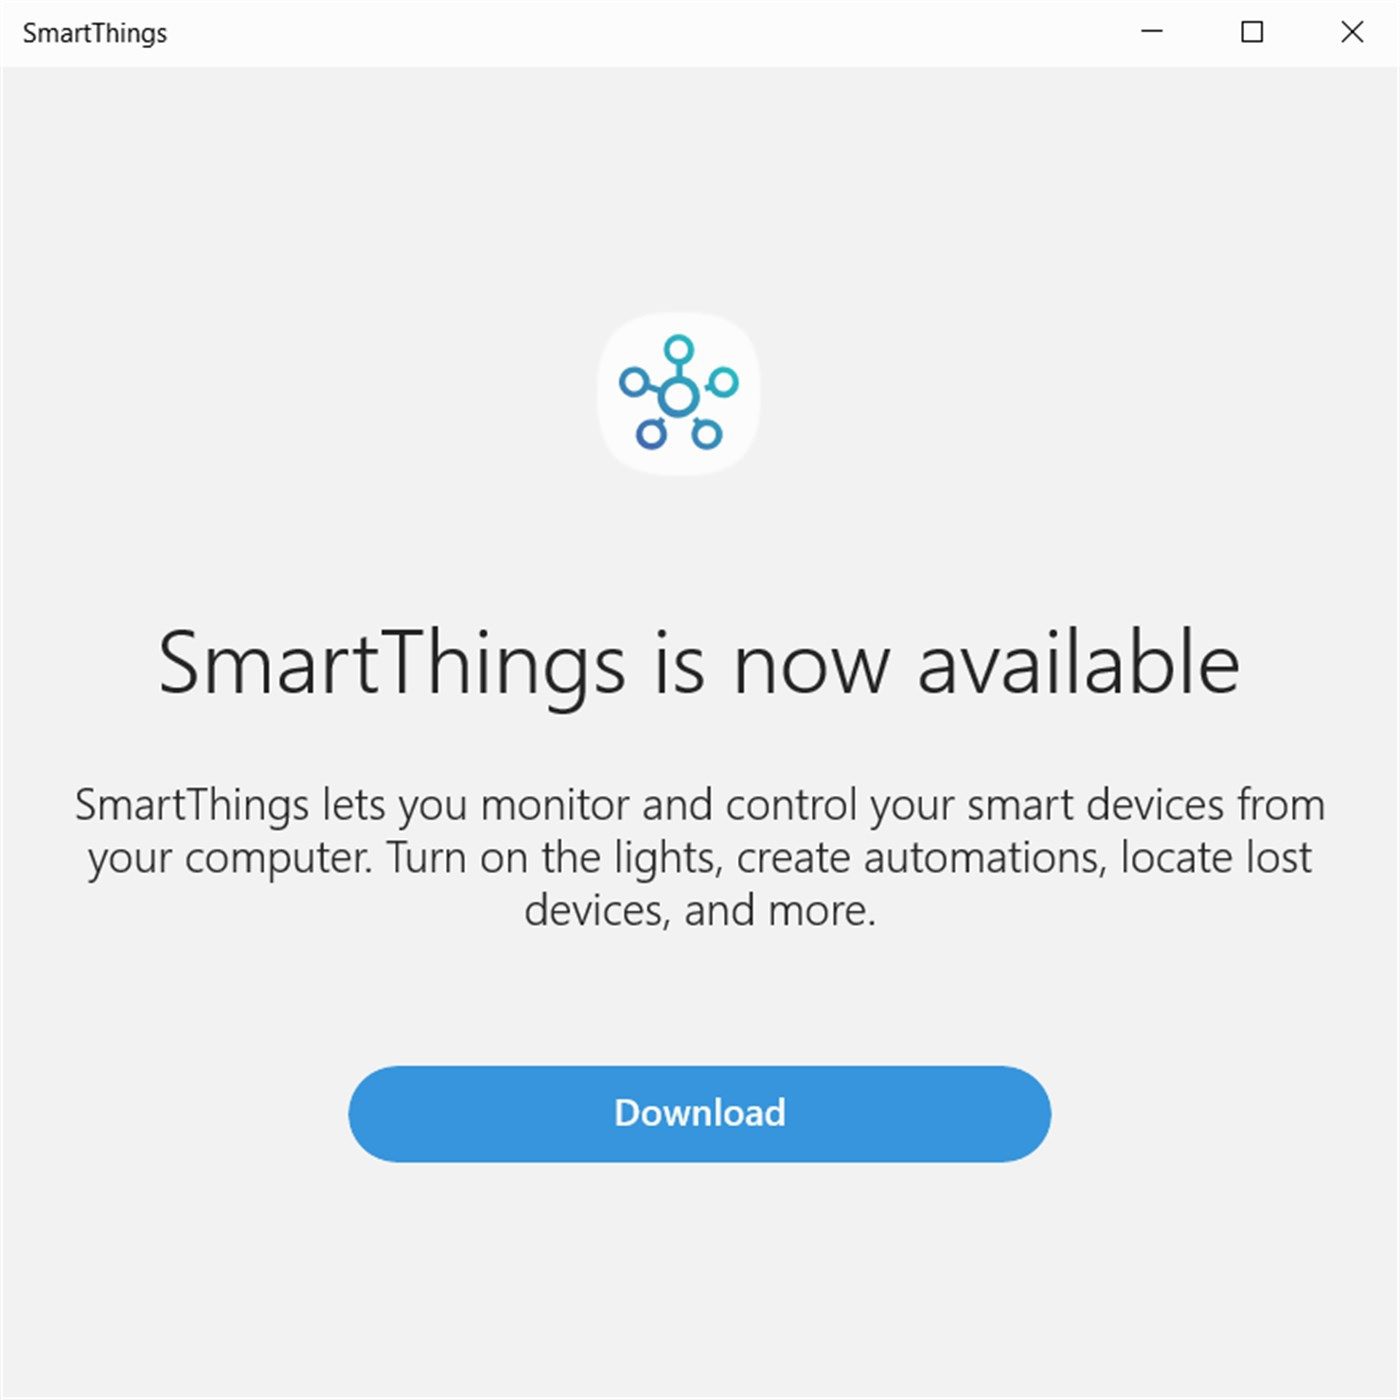 SmartThngs